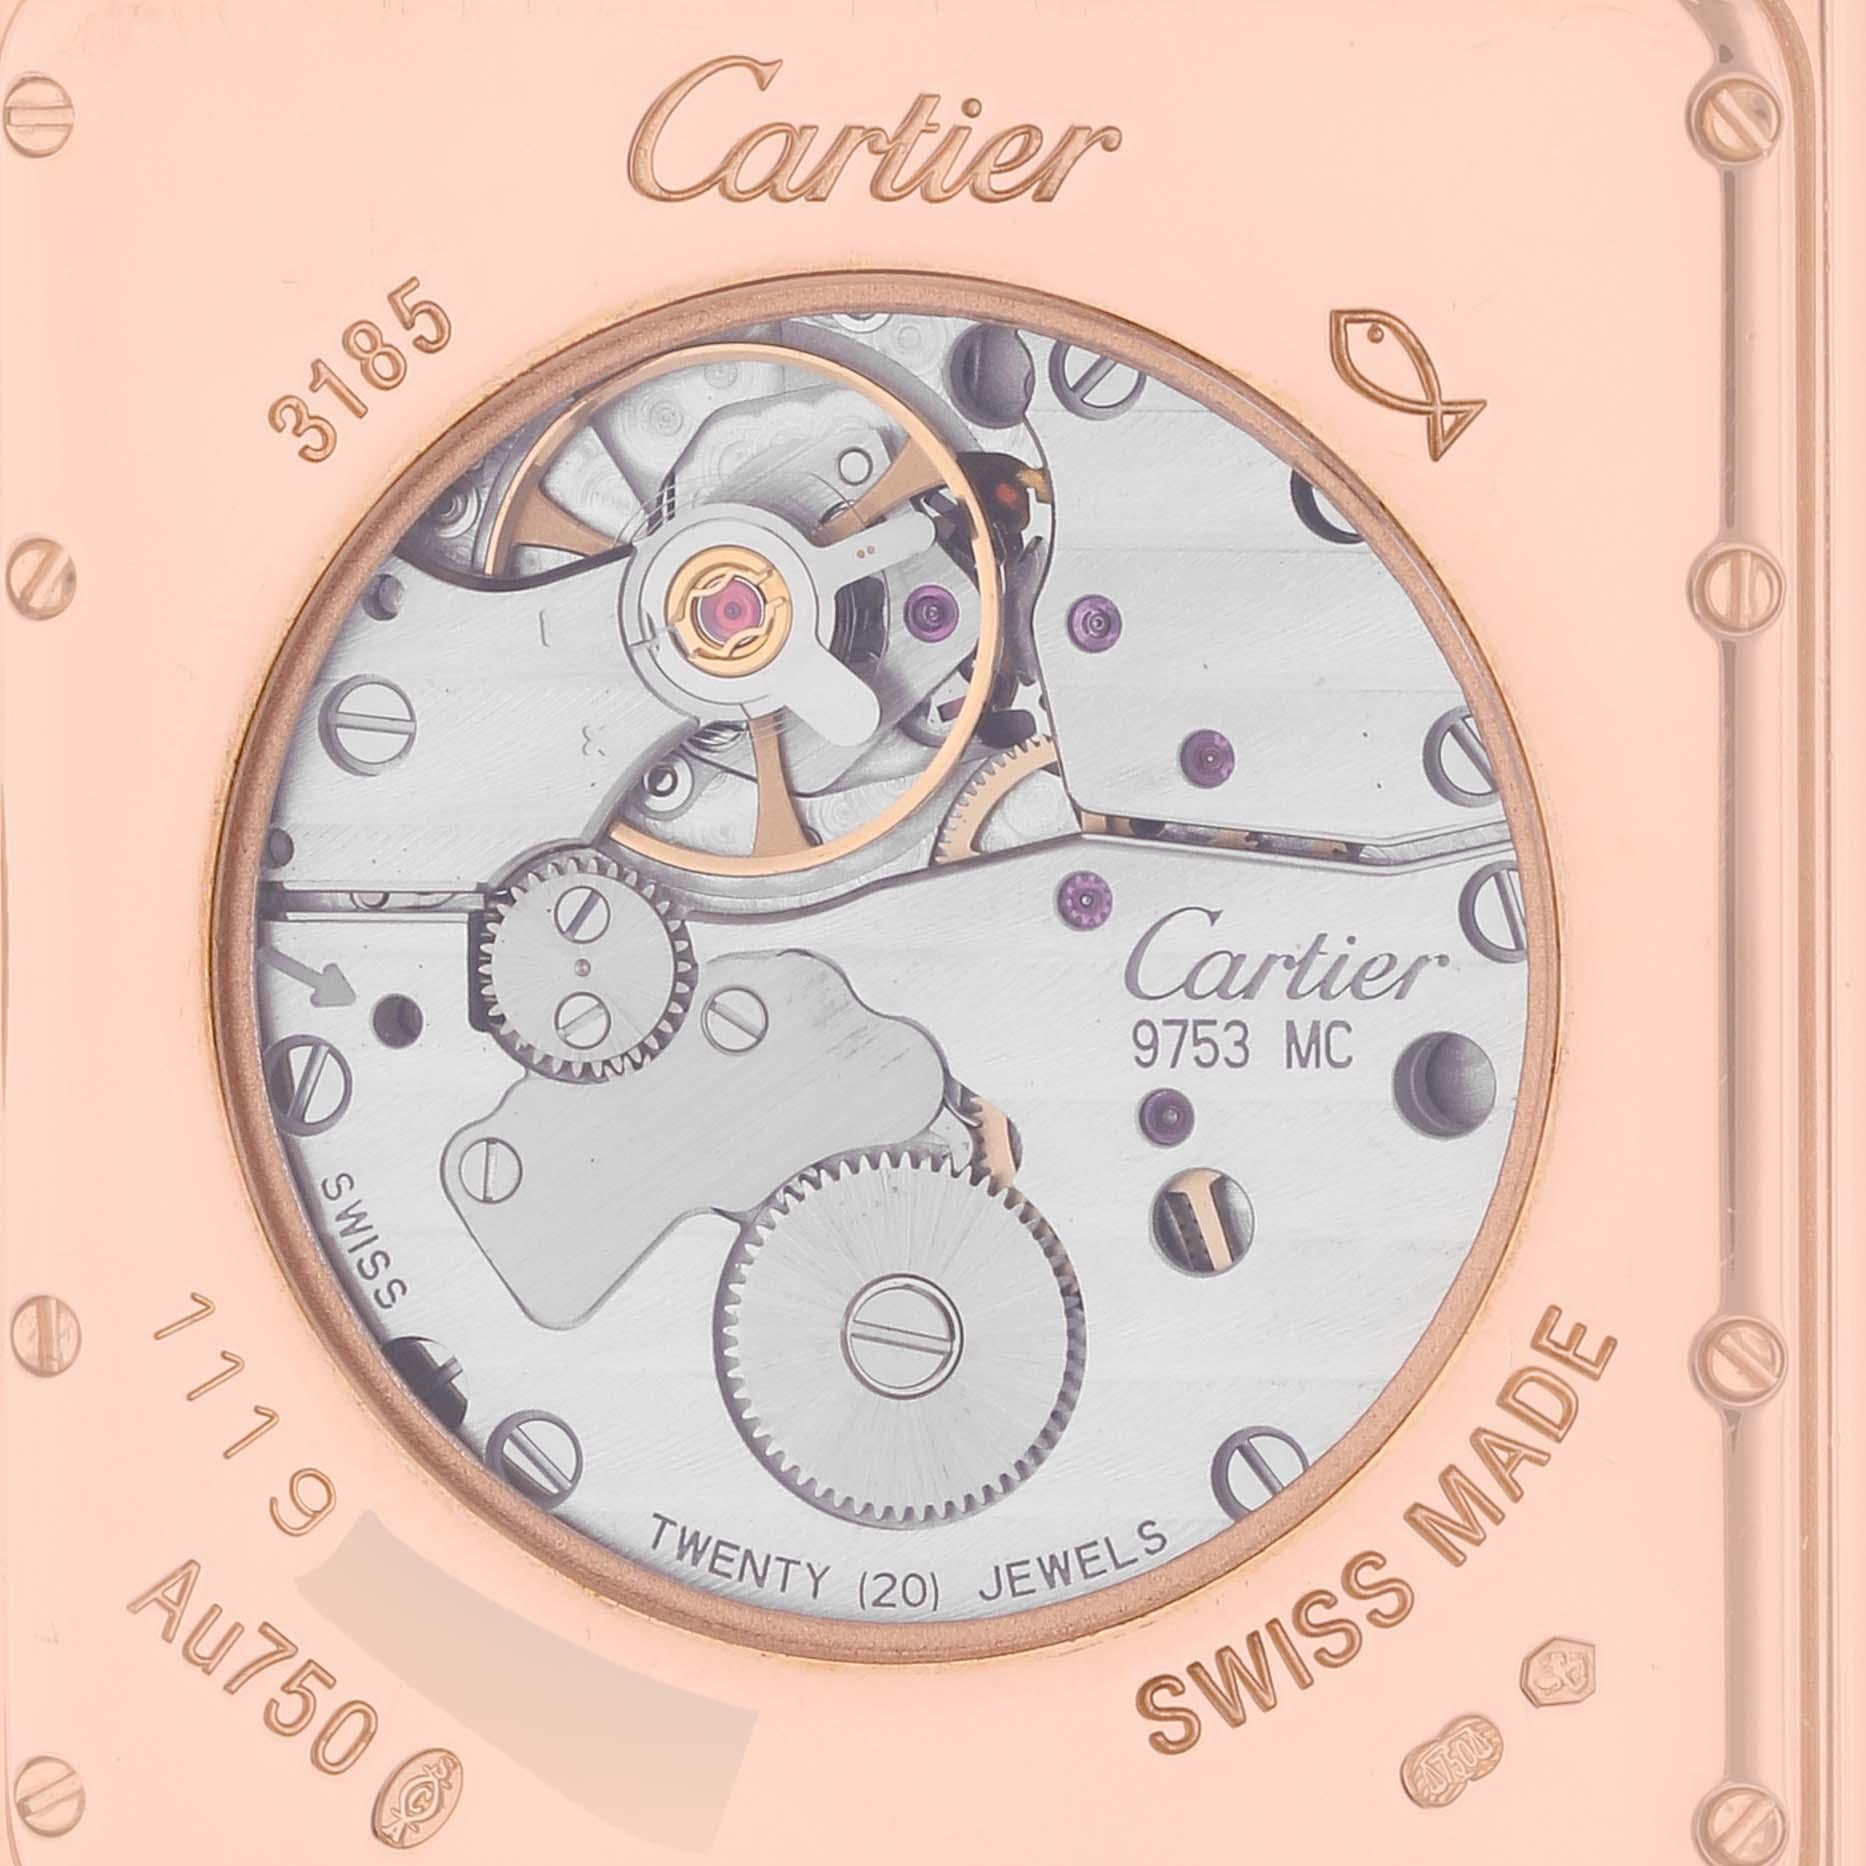 Cartier Tank Louis XL Power Reserve Rose Gold Mens Watch W1560003. Manual-winding movement. 18k rose gold case 39 mm x 30 mm. Circular grained crown set with a blue sapphire cabochon. Transparent exhibition sapphire crystal caseback. . Scratch